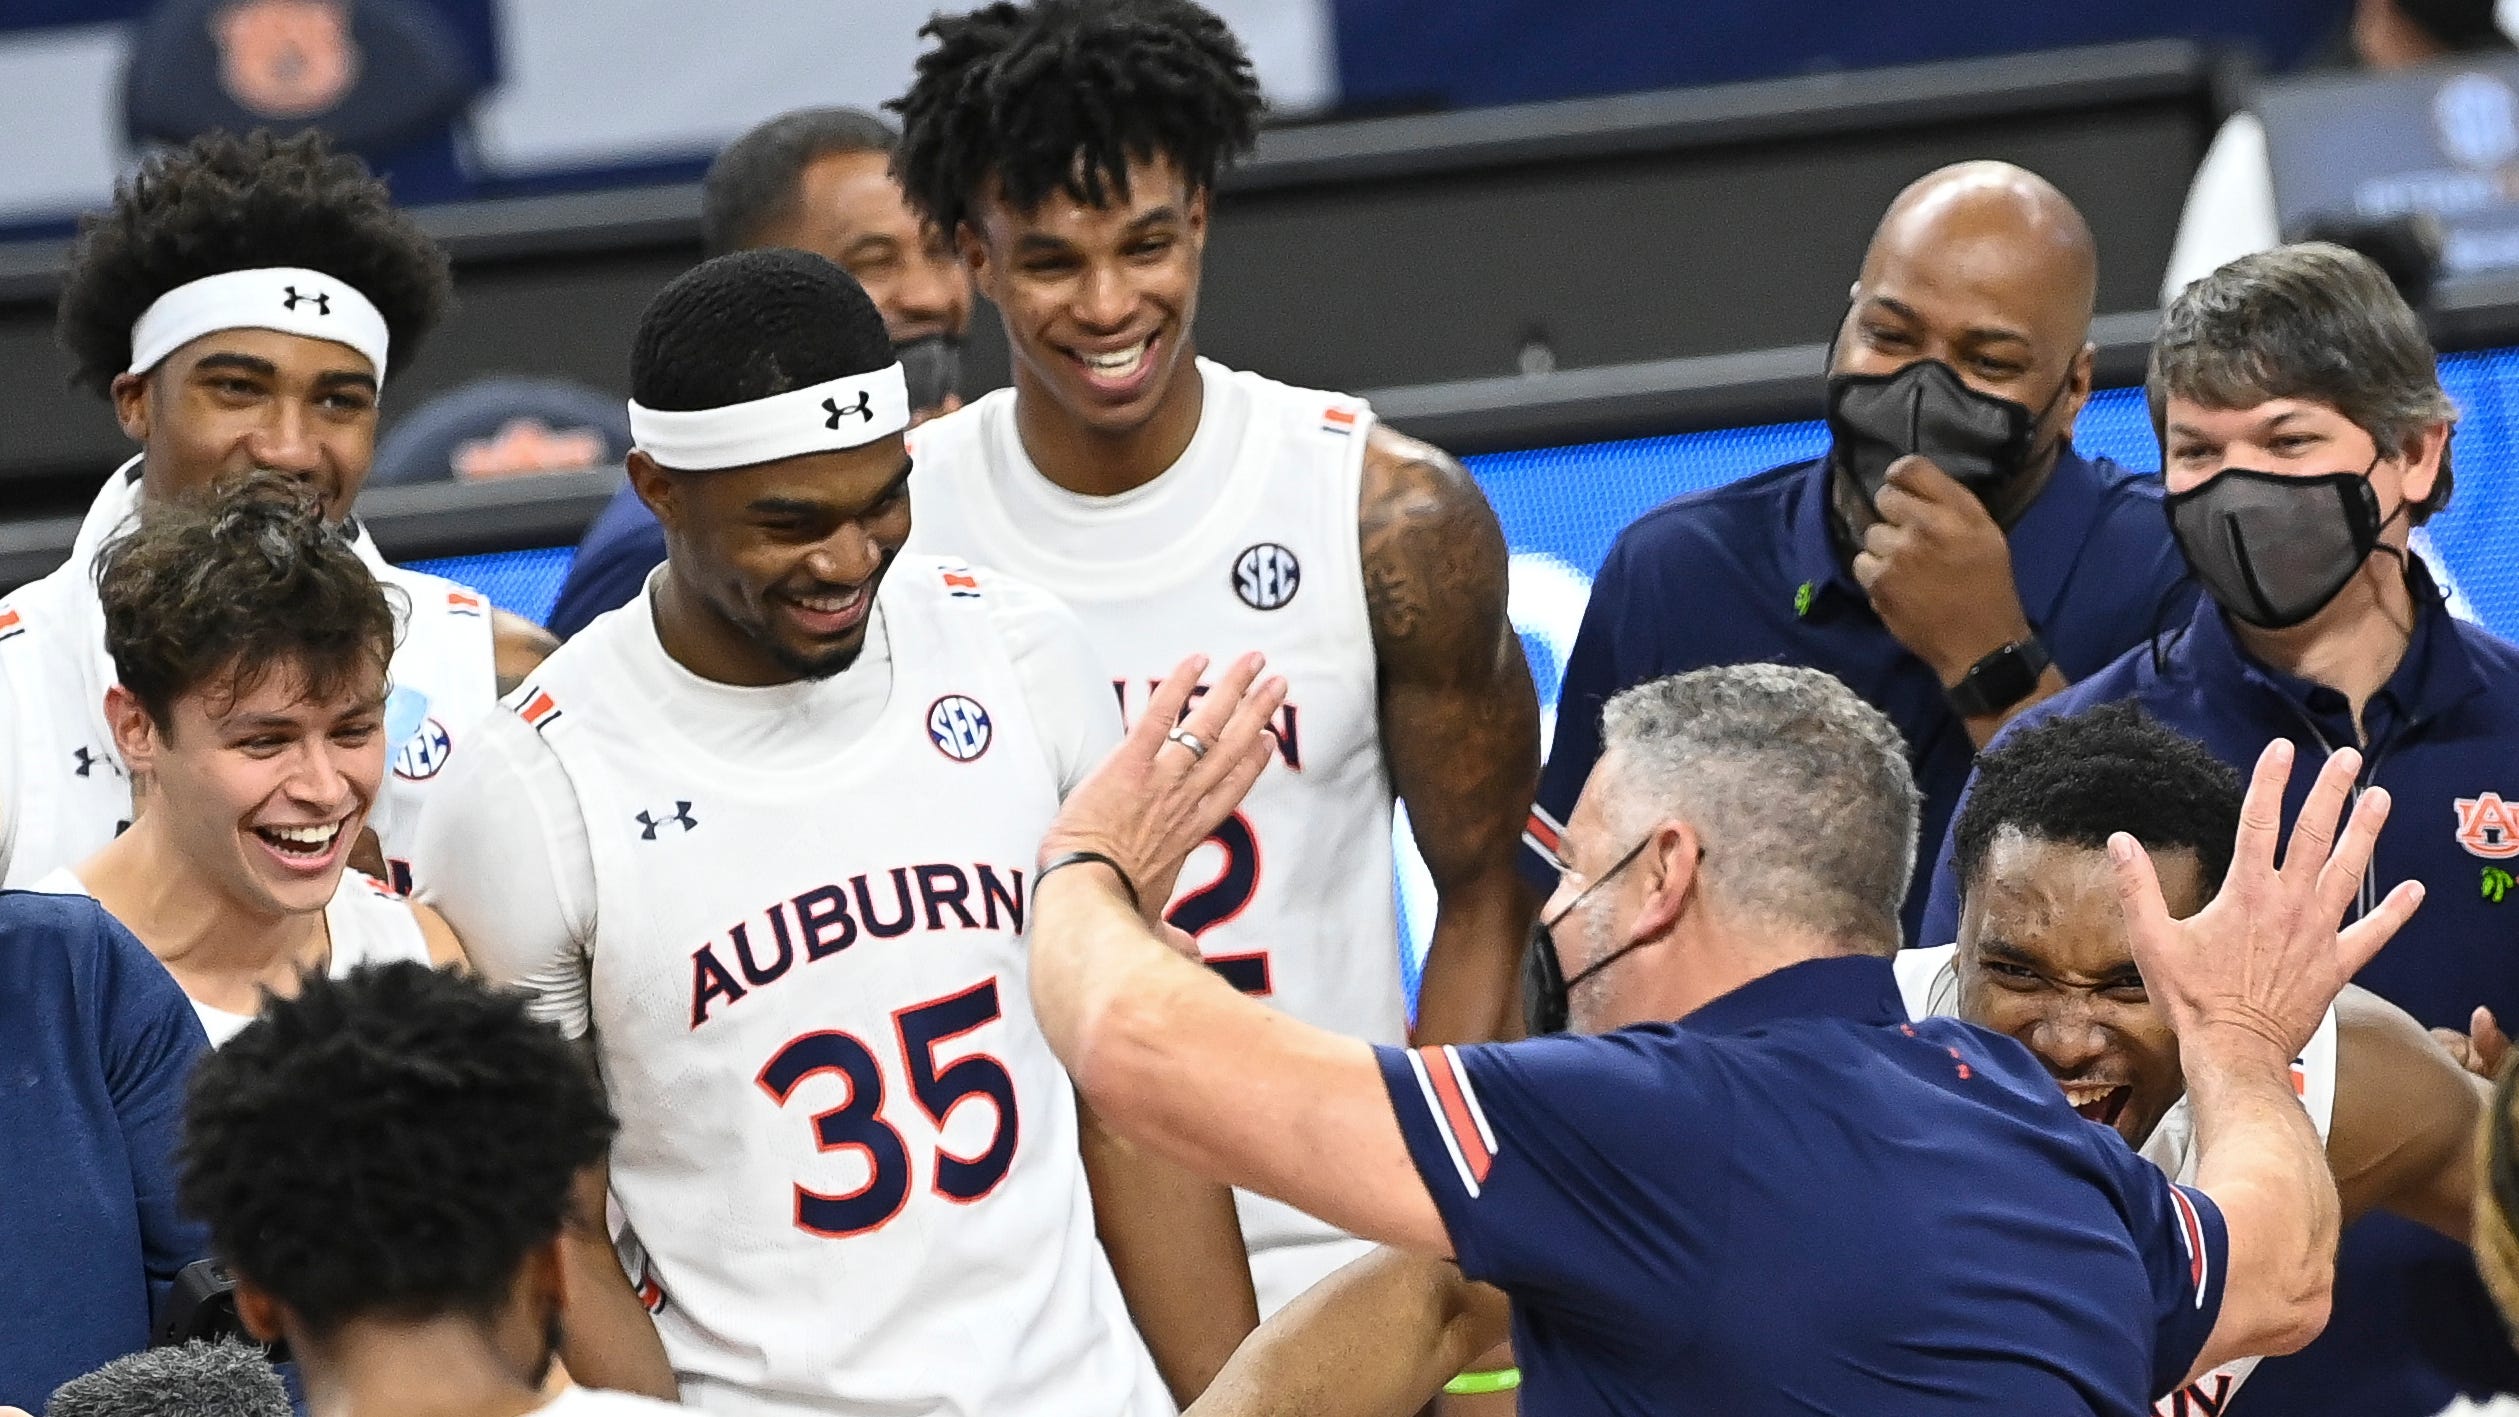 5 reasons to believe Auburn basketball will be much improved next season